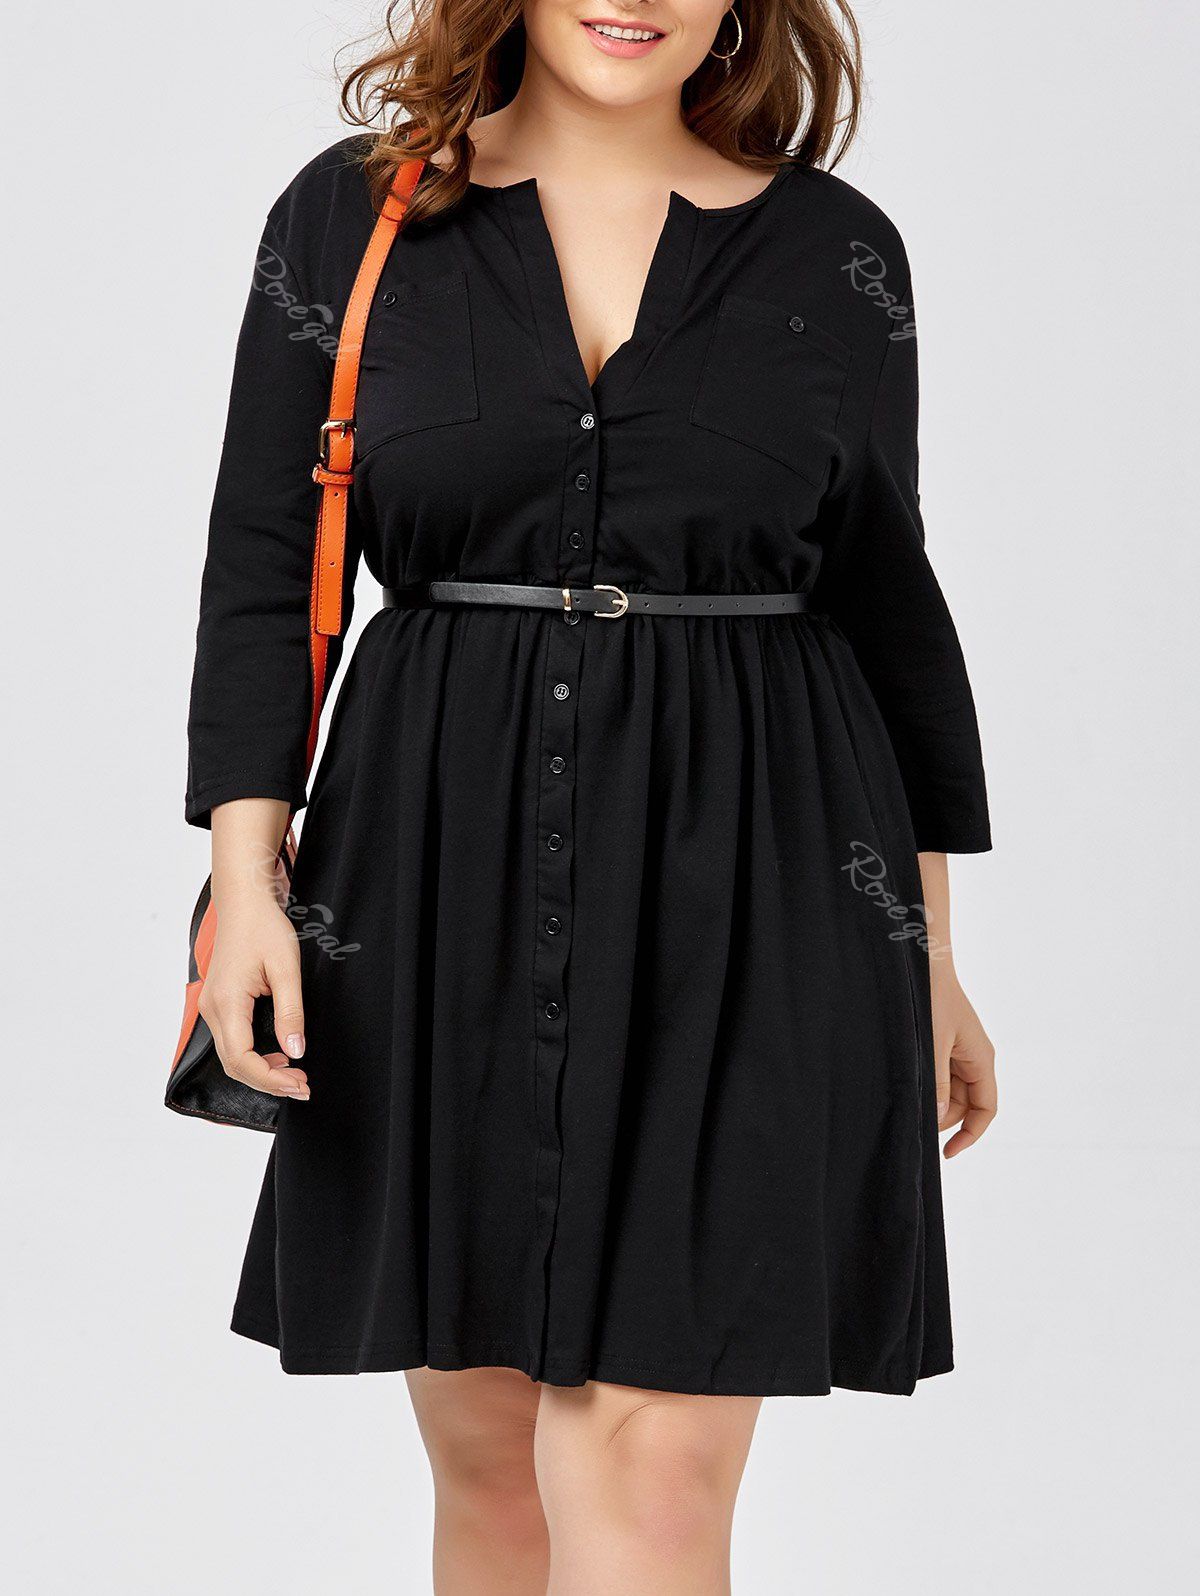 Buy Plus Size Long Sleeve Button Down Shirt Dress with Belt  